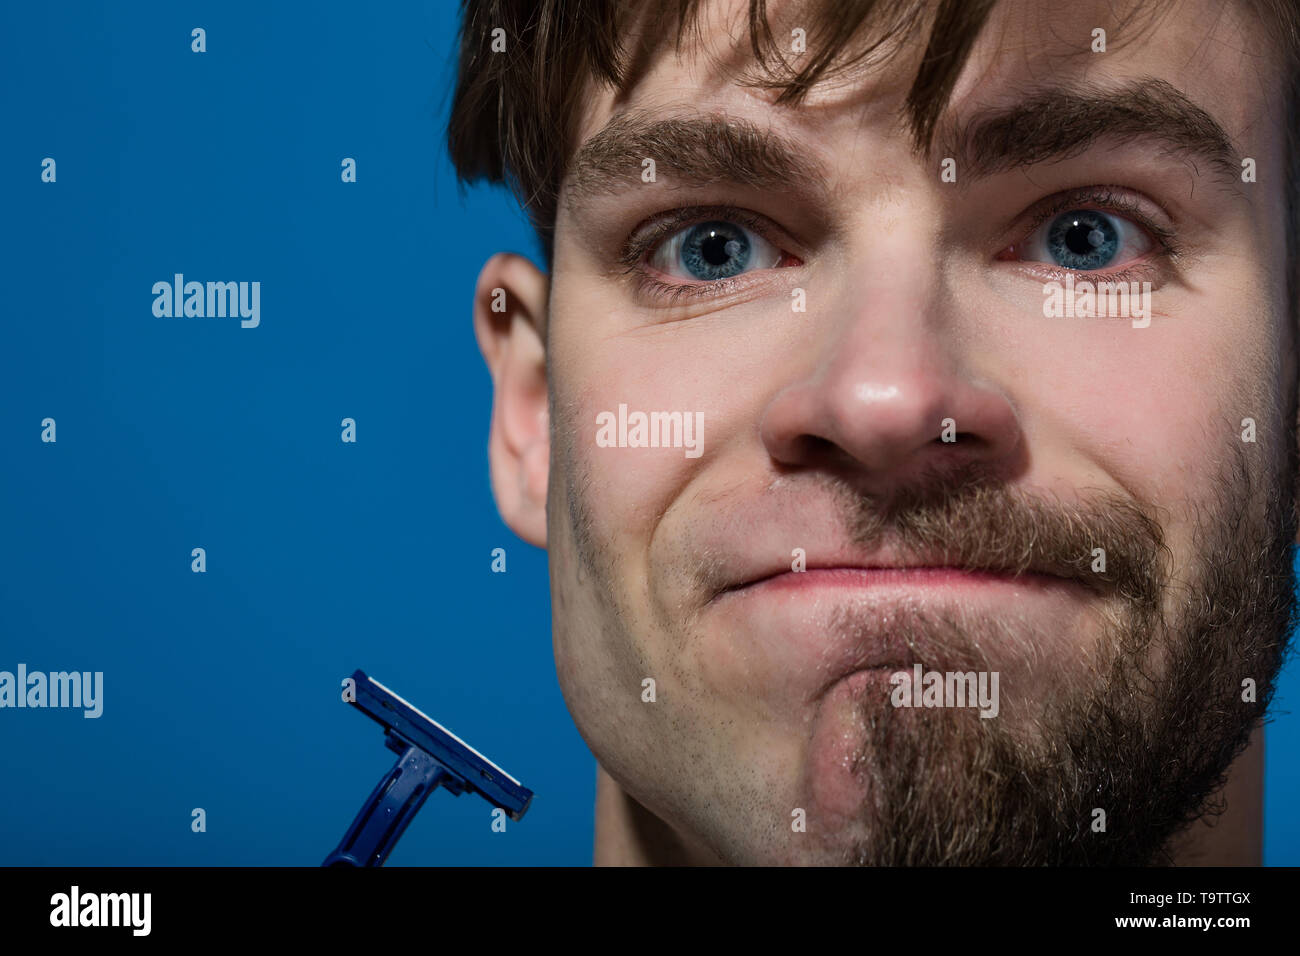 Man face half shaved and bearded with razor Stock Photo